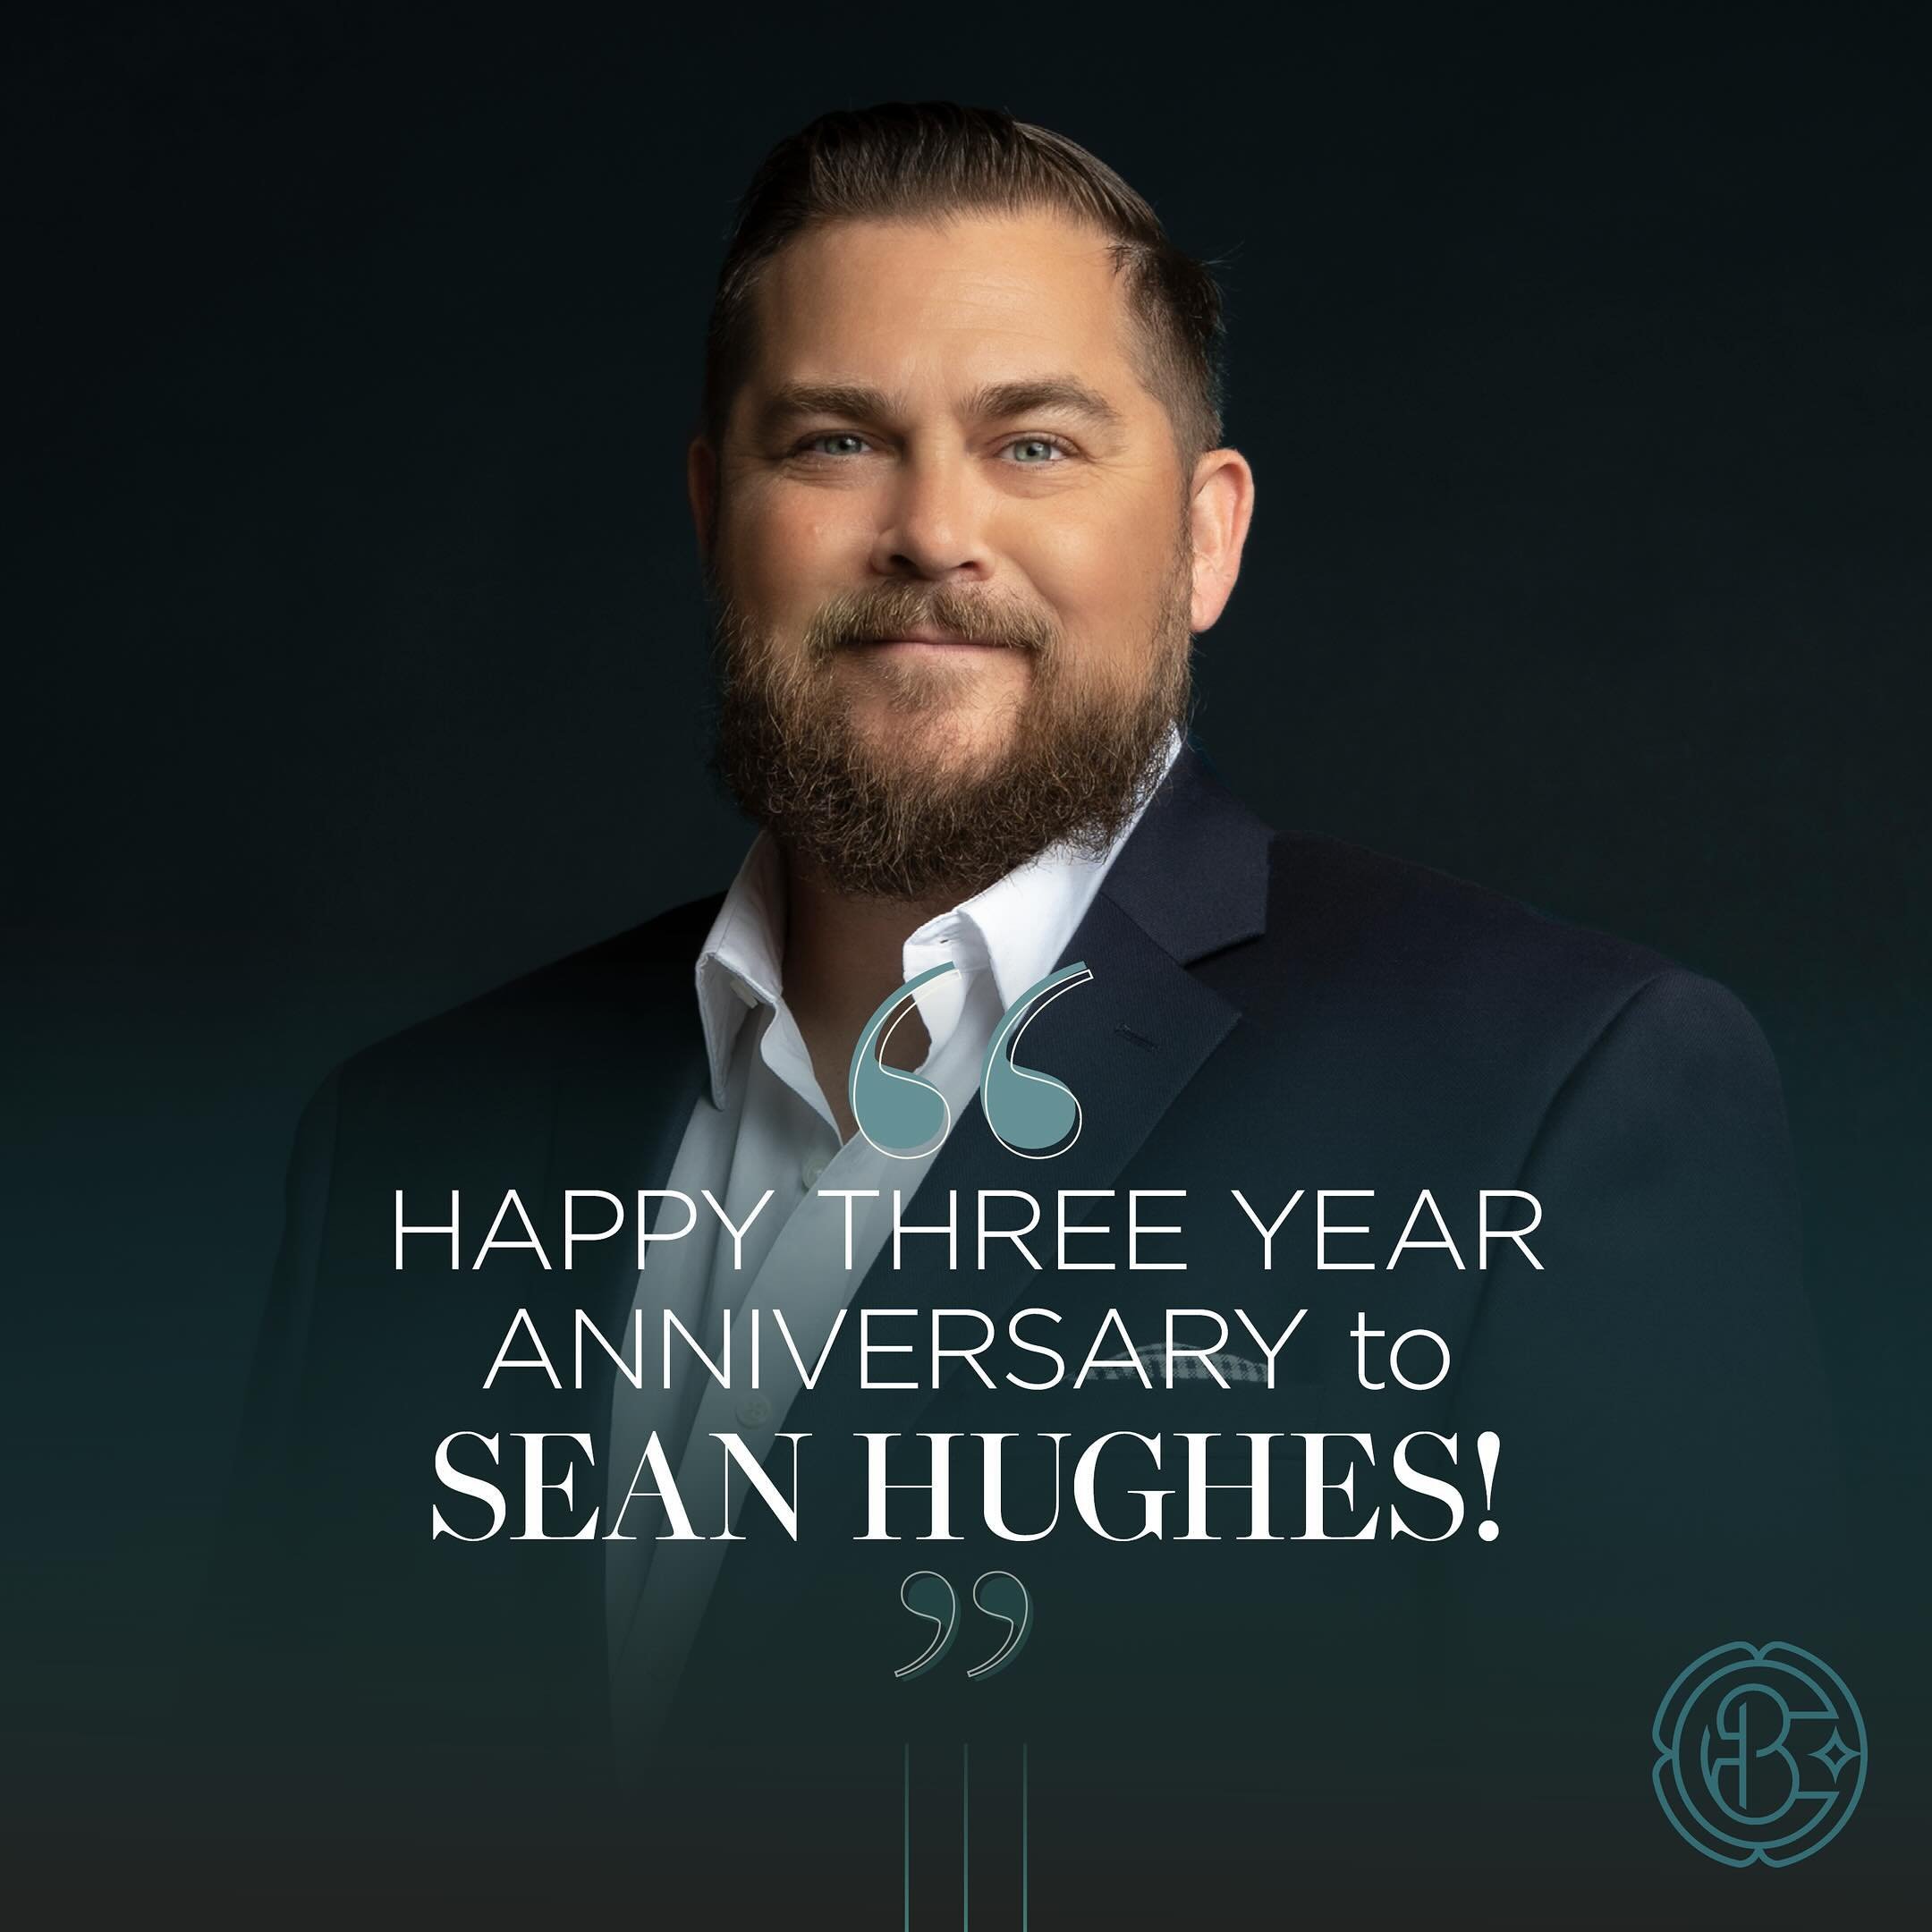 Happy 3-year Craft &amp; Bauerversary to our Senior Partner Sean Hughes!⁠
⁠
Growing up between Los Angeles and D.C. has given Sean an appreciation for LA&rsquo;s diverse architecture. &ldquo;Every home tells a story,&rdquo; whether it&rsquo;s a lovin